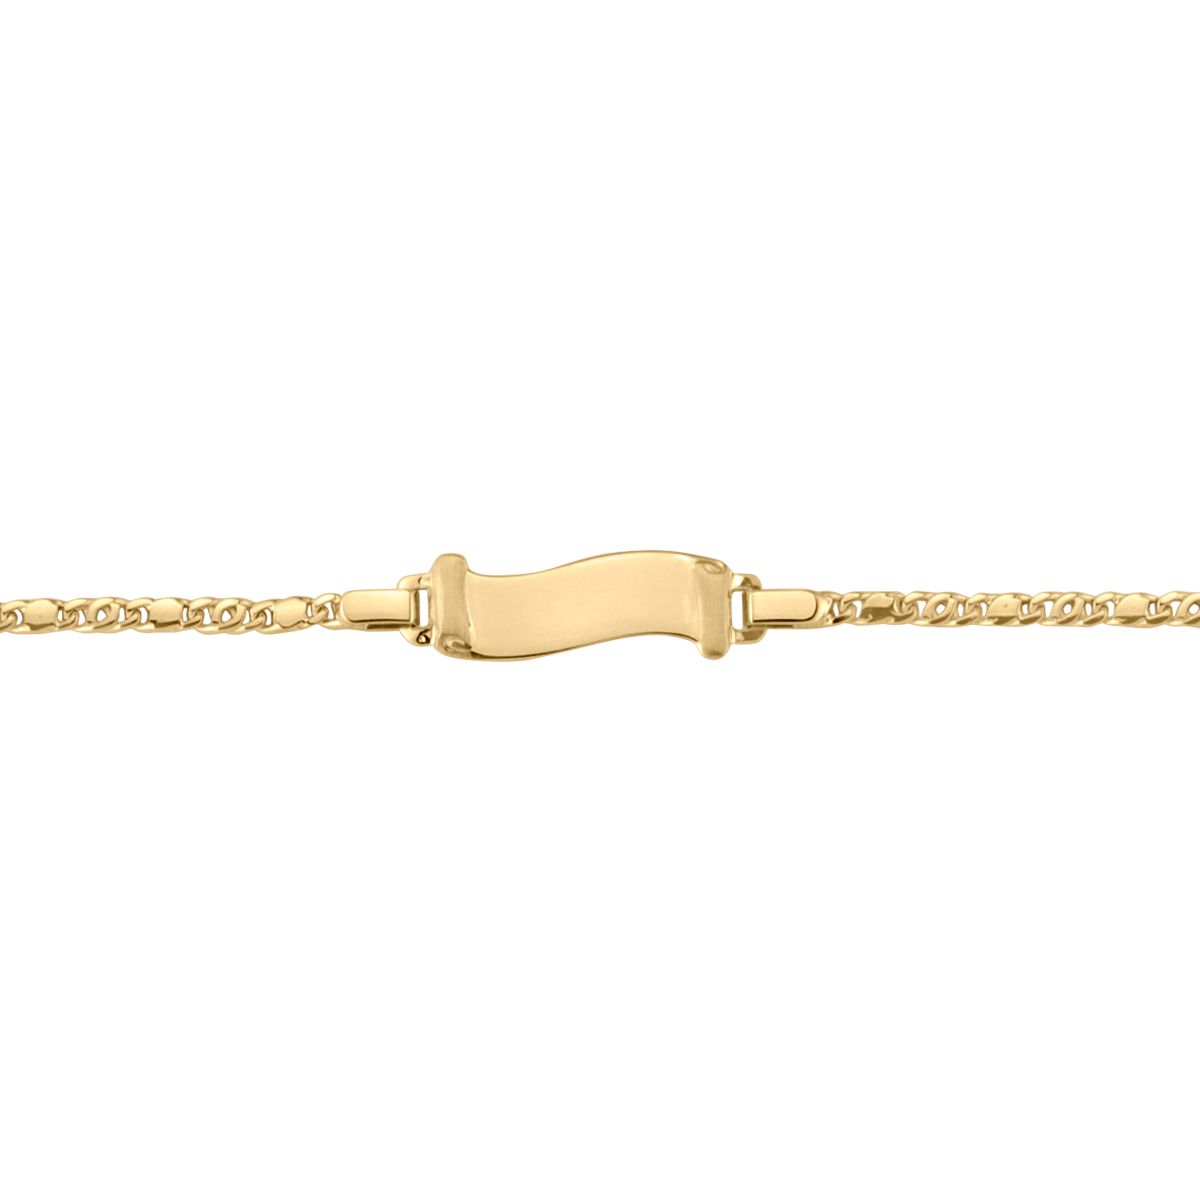 B0105, Gold Bracelet, Engravable ID, Yellow or White Gold